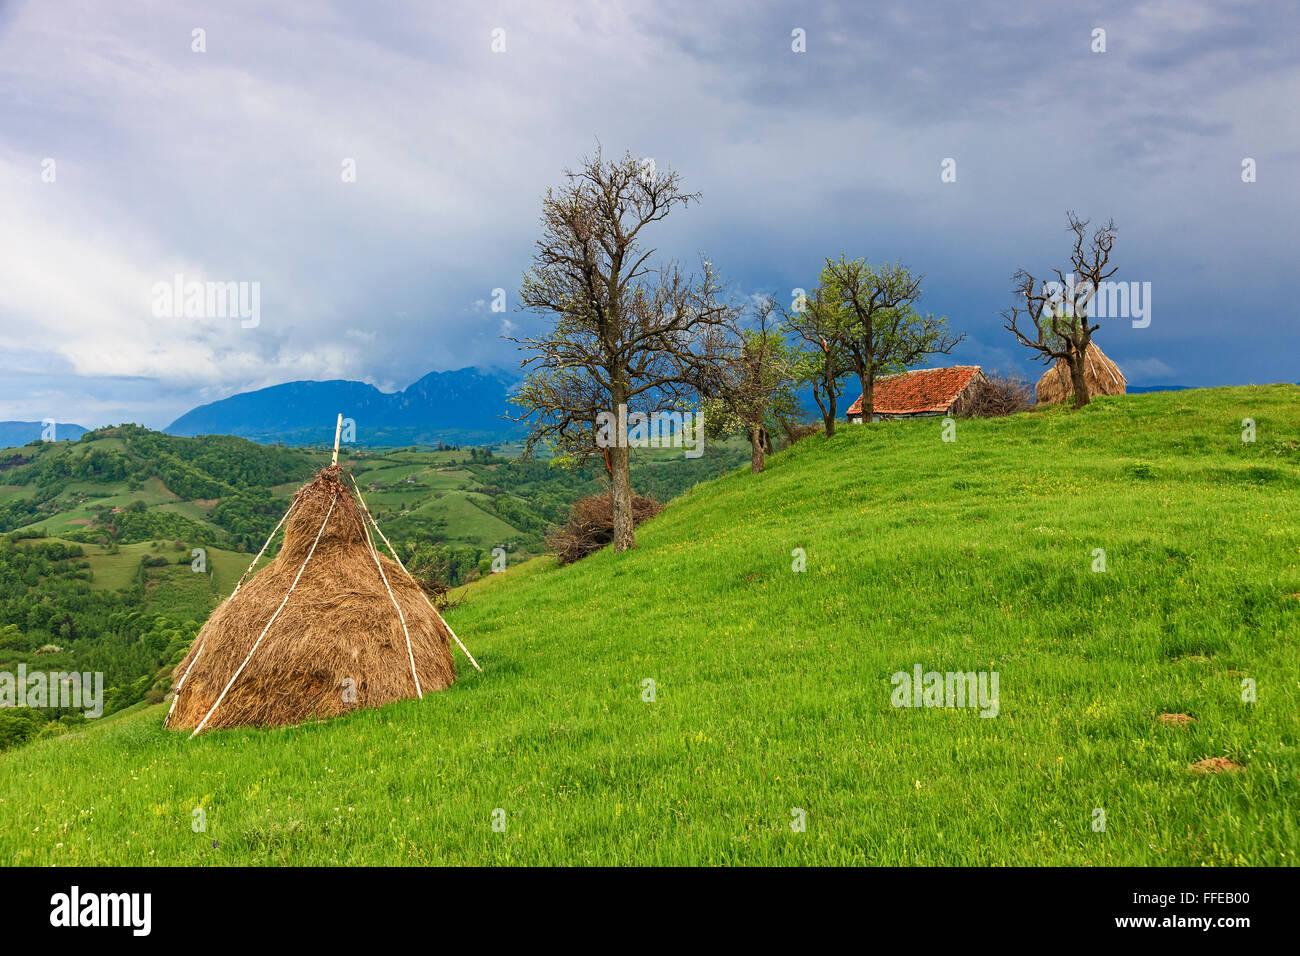 Hay in a village in the mountains at spring Stock Photo